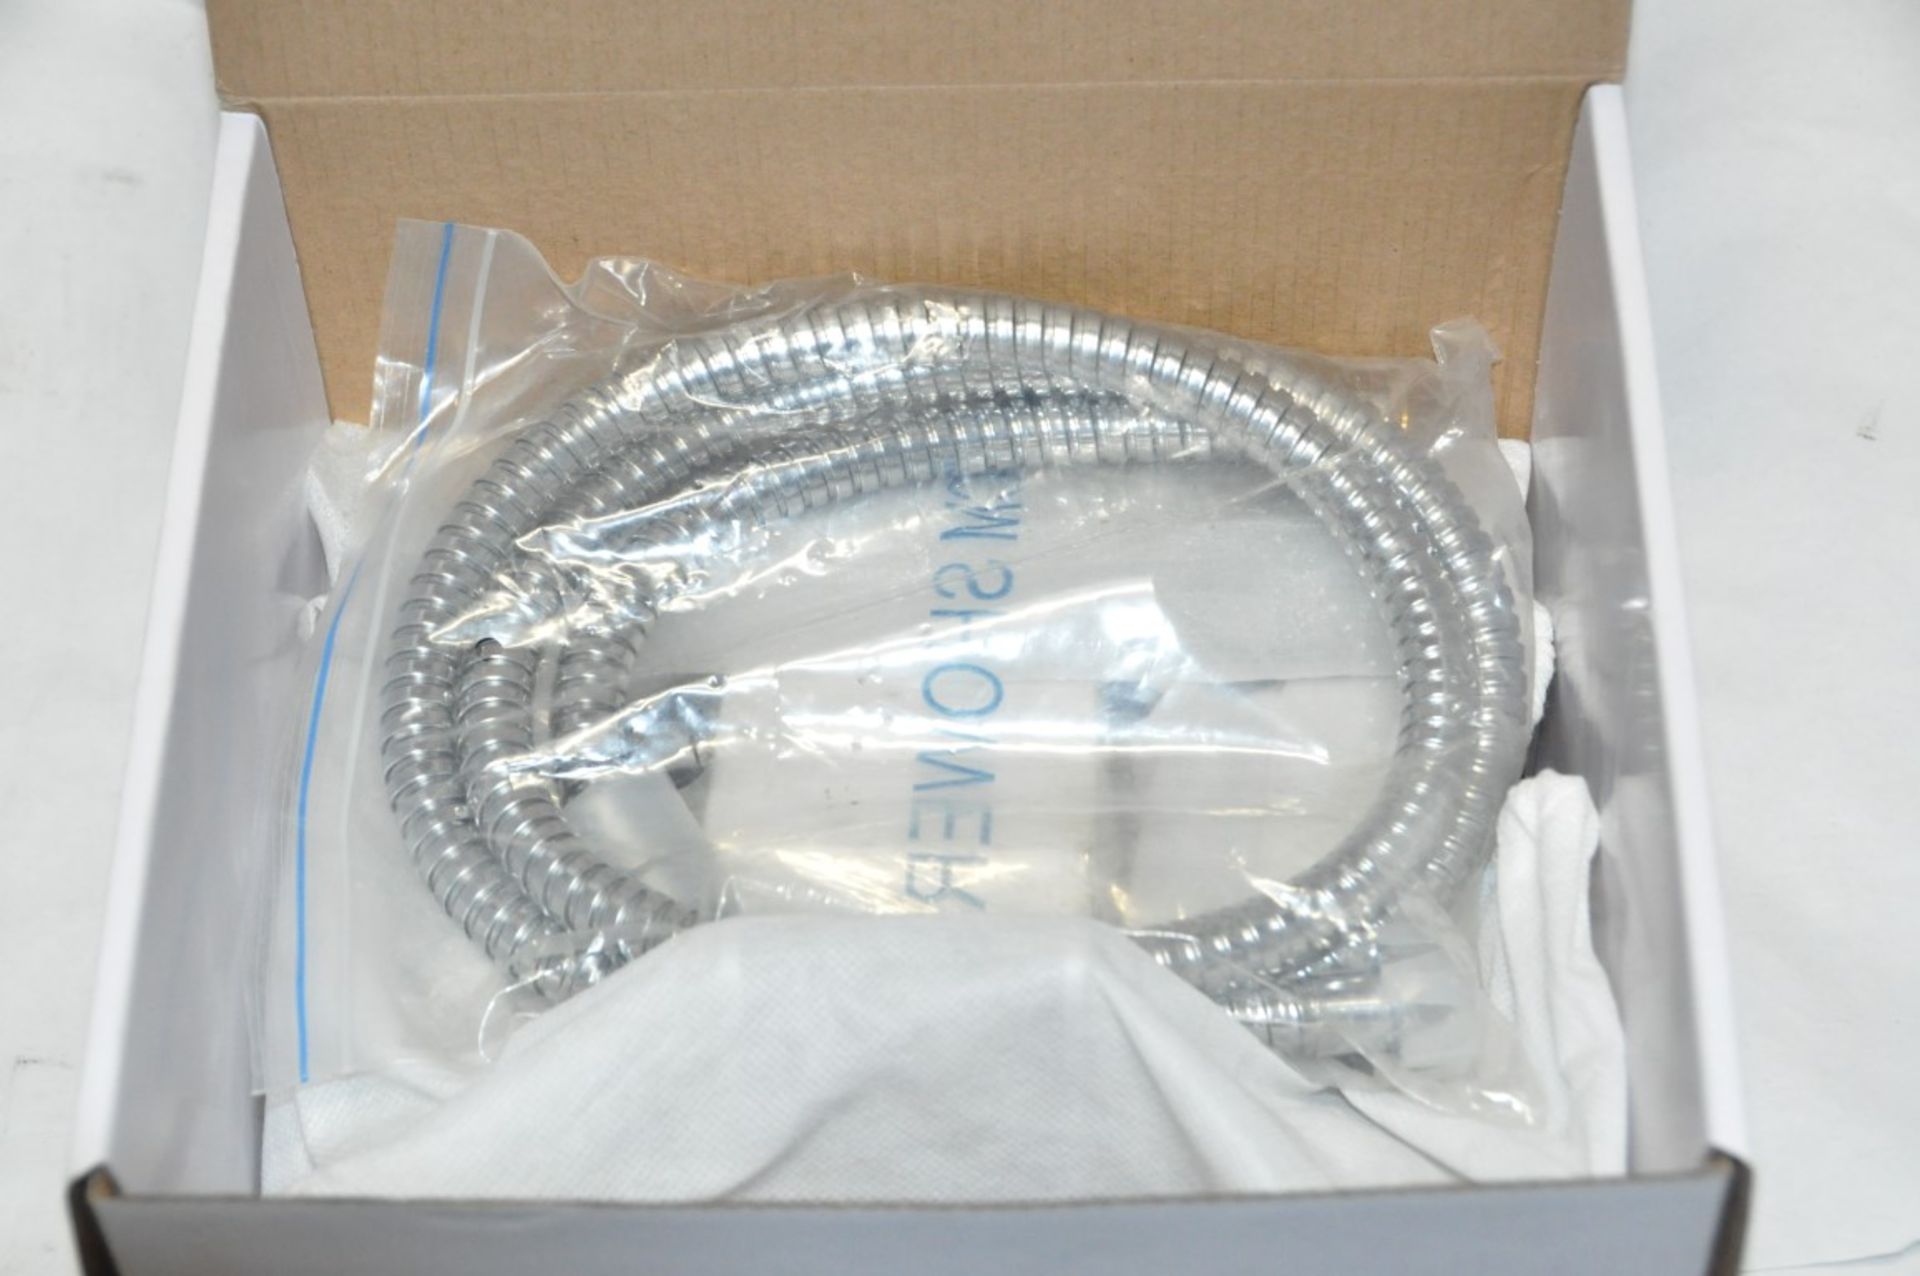 1 x Bath Shower Mixer – Includes Square Shower Kit – Used Commercial Samples – Fittings Not Included - Image 3 of 6